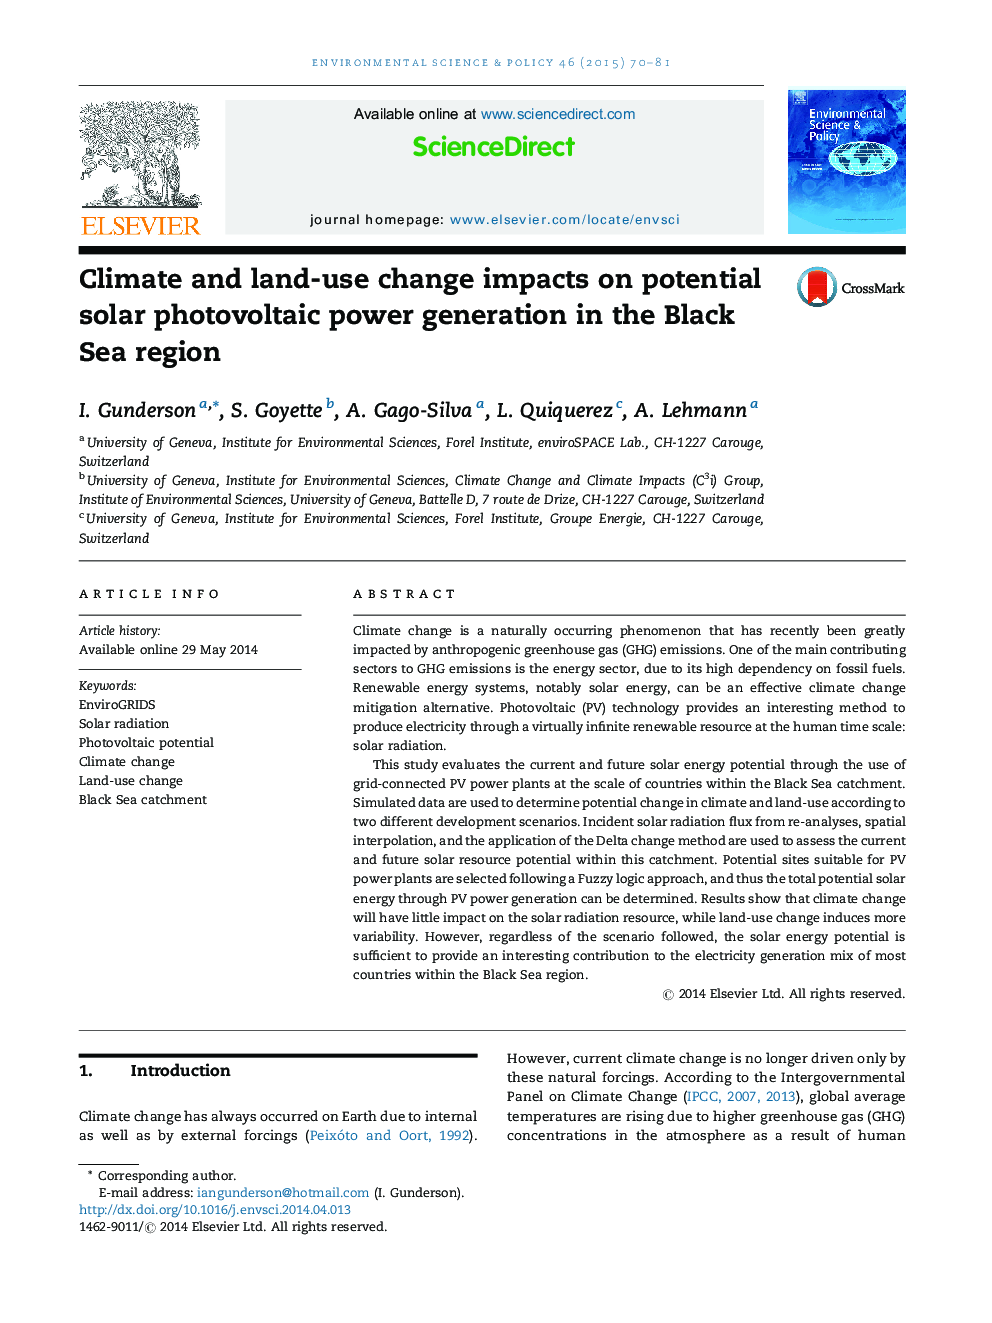 Climate and land-use change impacts on potential solar photovoltaic power generation in the Black Sea region